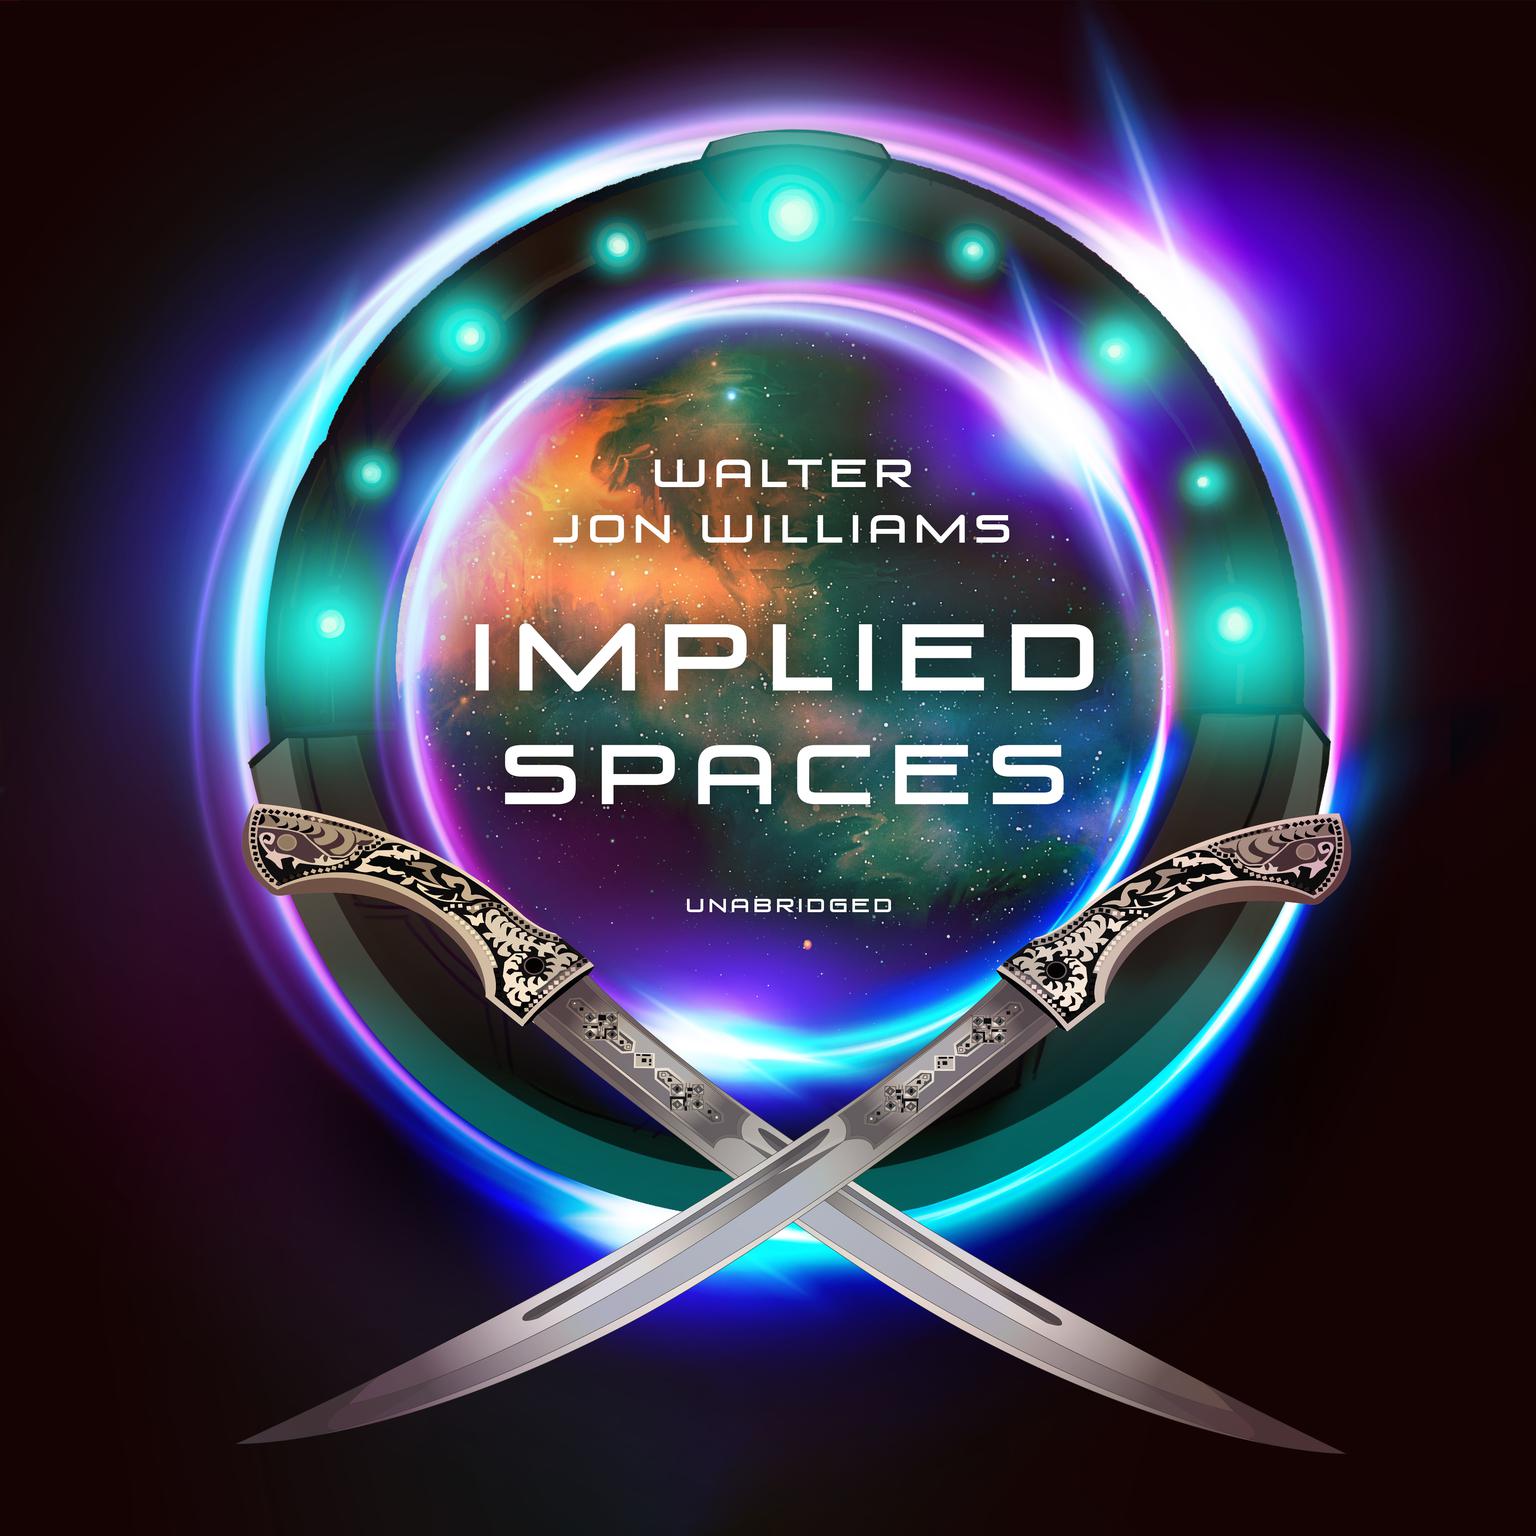 Implied Spaces Audiobook, by Walter Jon Williams